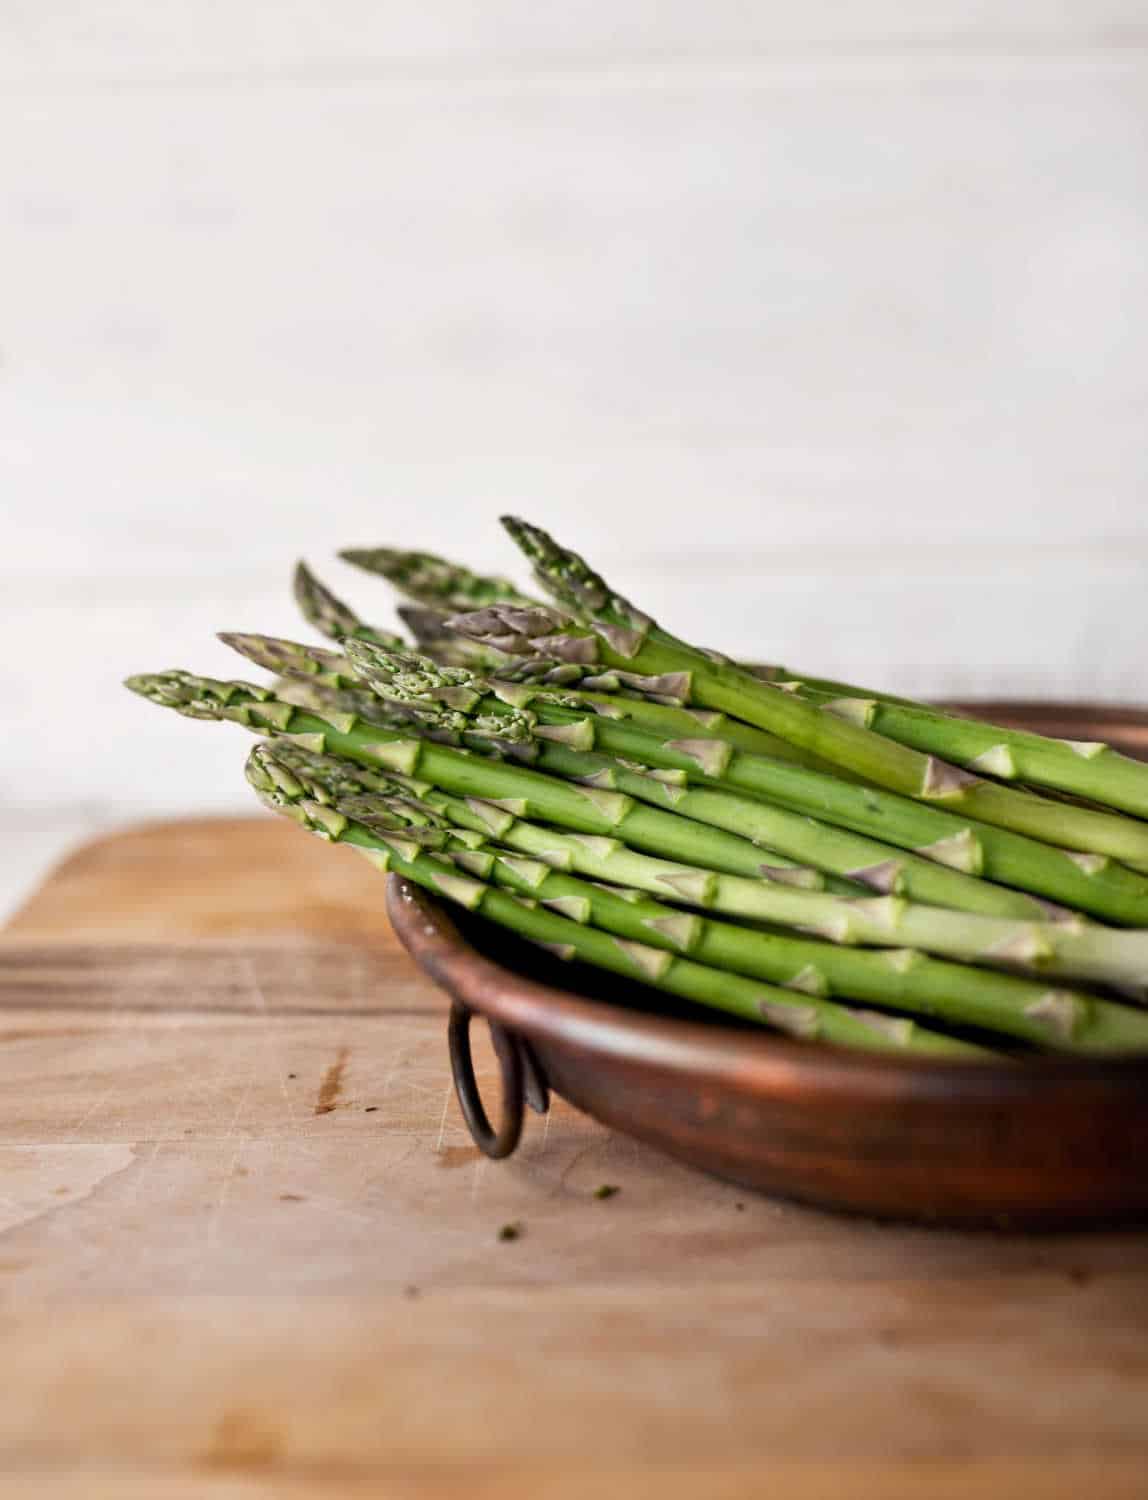 a picture of garden asparagus on a wooden table